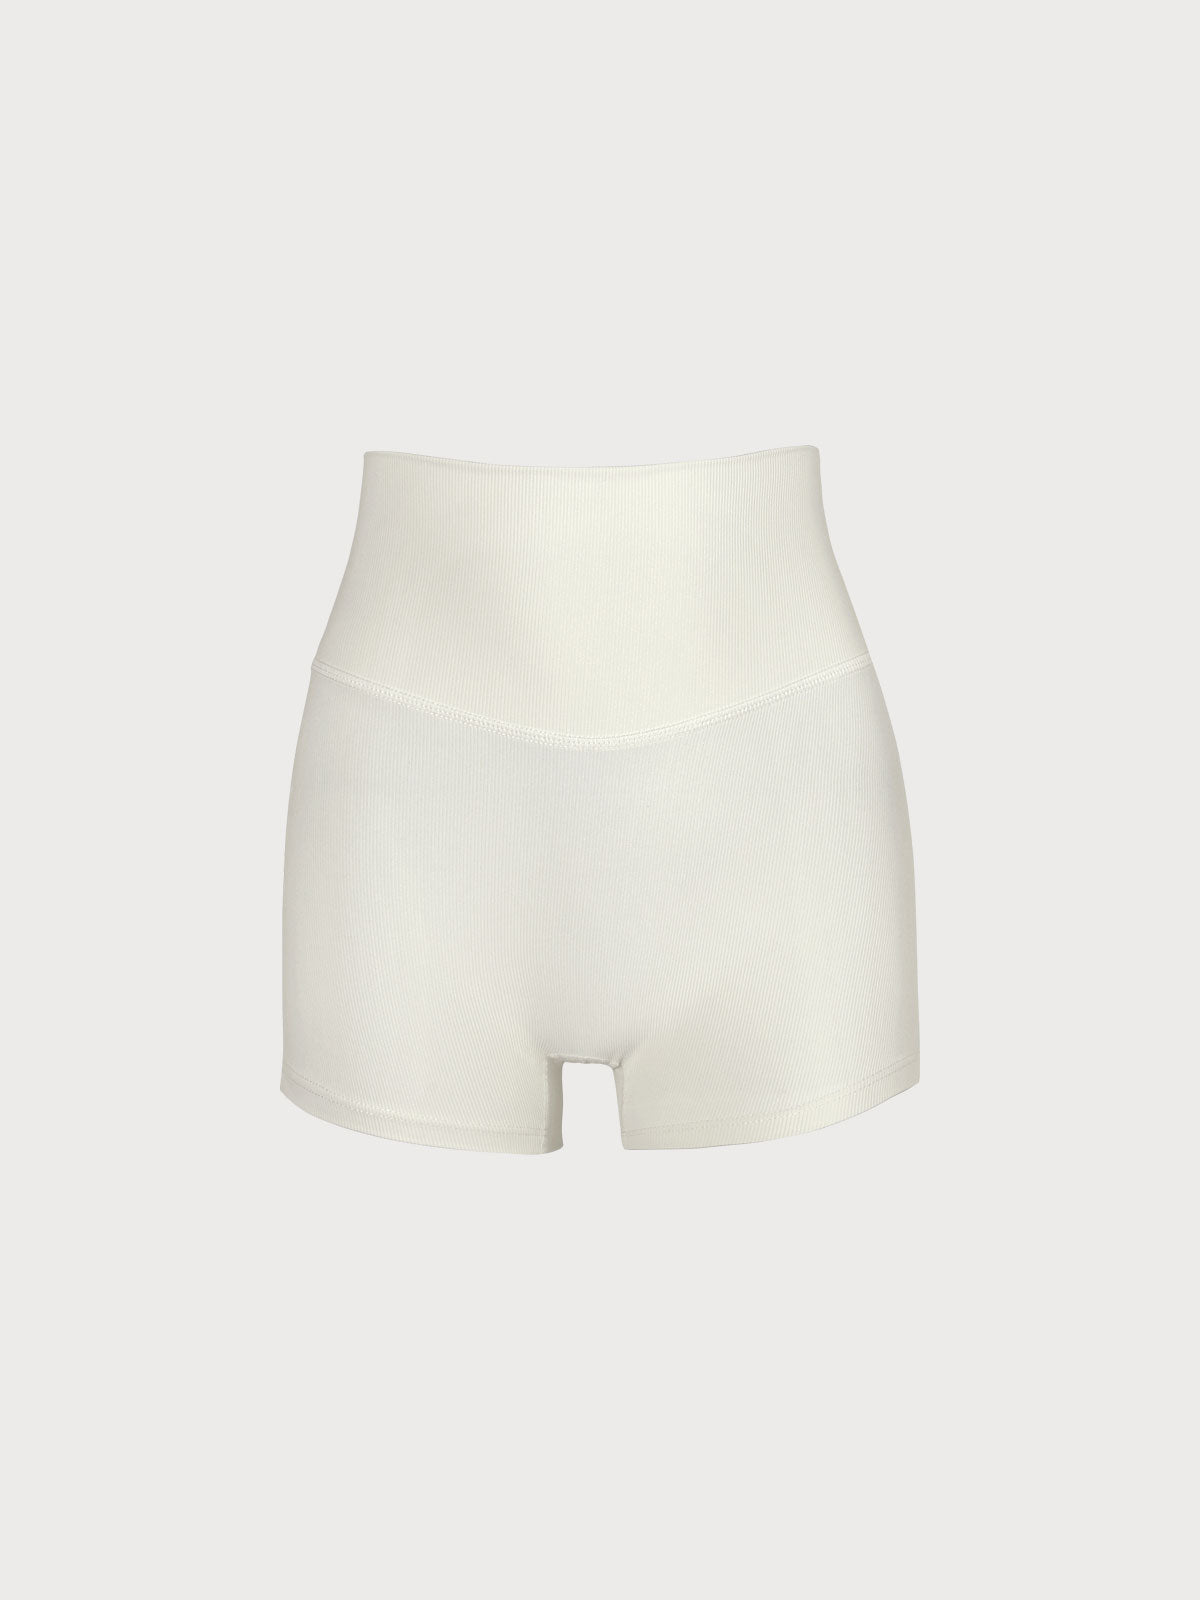 White High Waist Ribbed Yoga Shorts 4” & Reviews - Beige - Sustainable Yoga  Bottoms